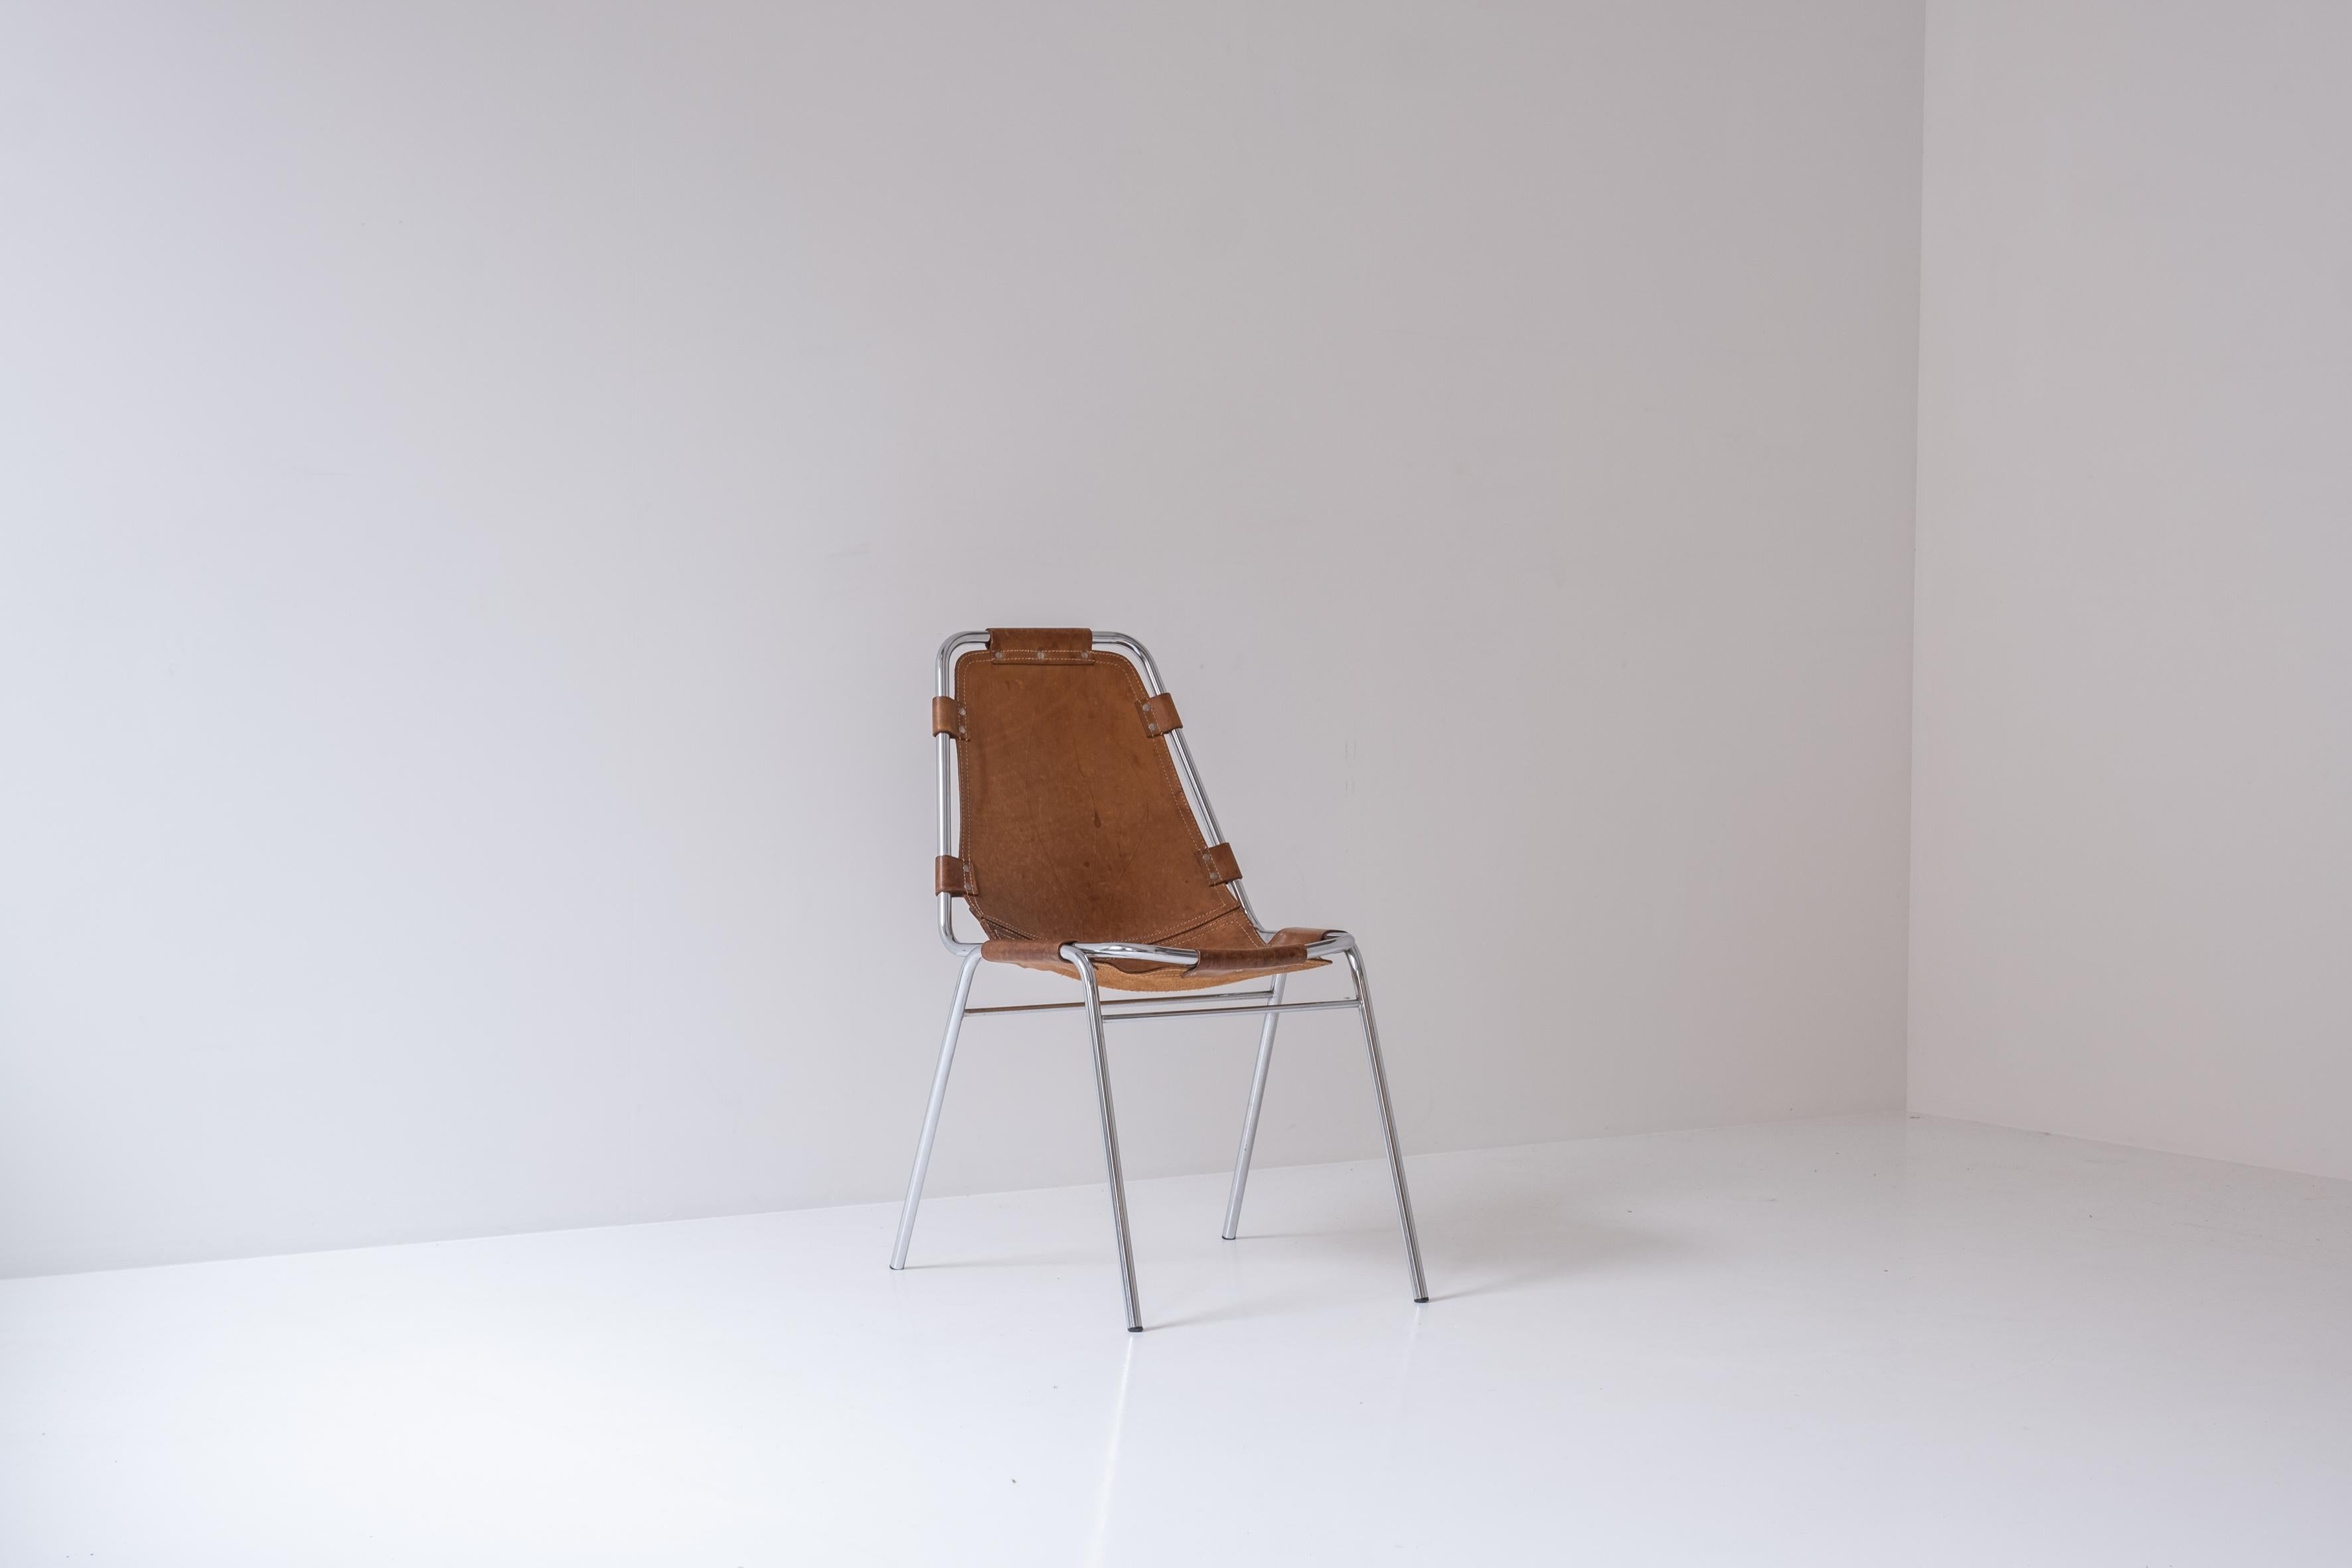 Side chair selected by Charlotte Perriand for Les Arcs, France 1970s. This chair features a tubular steel frame and cognac leather seat. Well presented condition, with a soft overall patina.